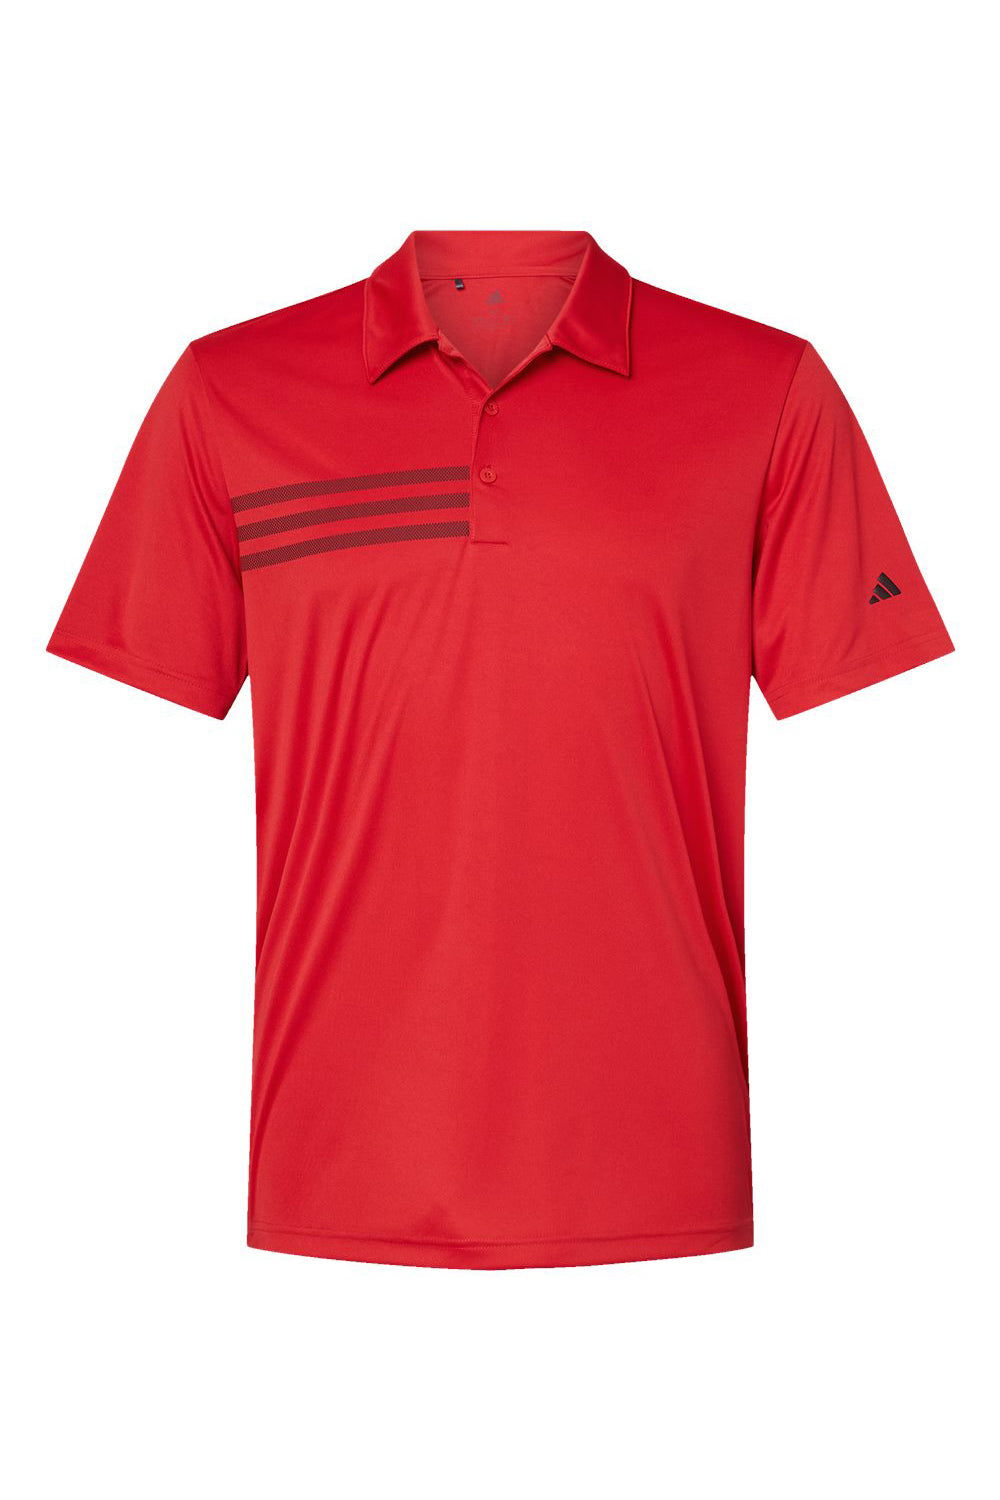 Adidas A324 Mens 3 Stripes Short Sleeve Polo Shirt Collegiate Red/Black Flat Front